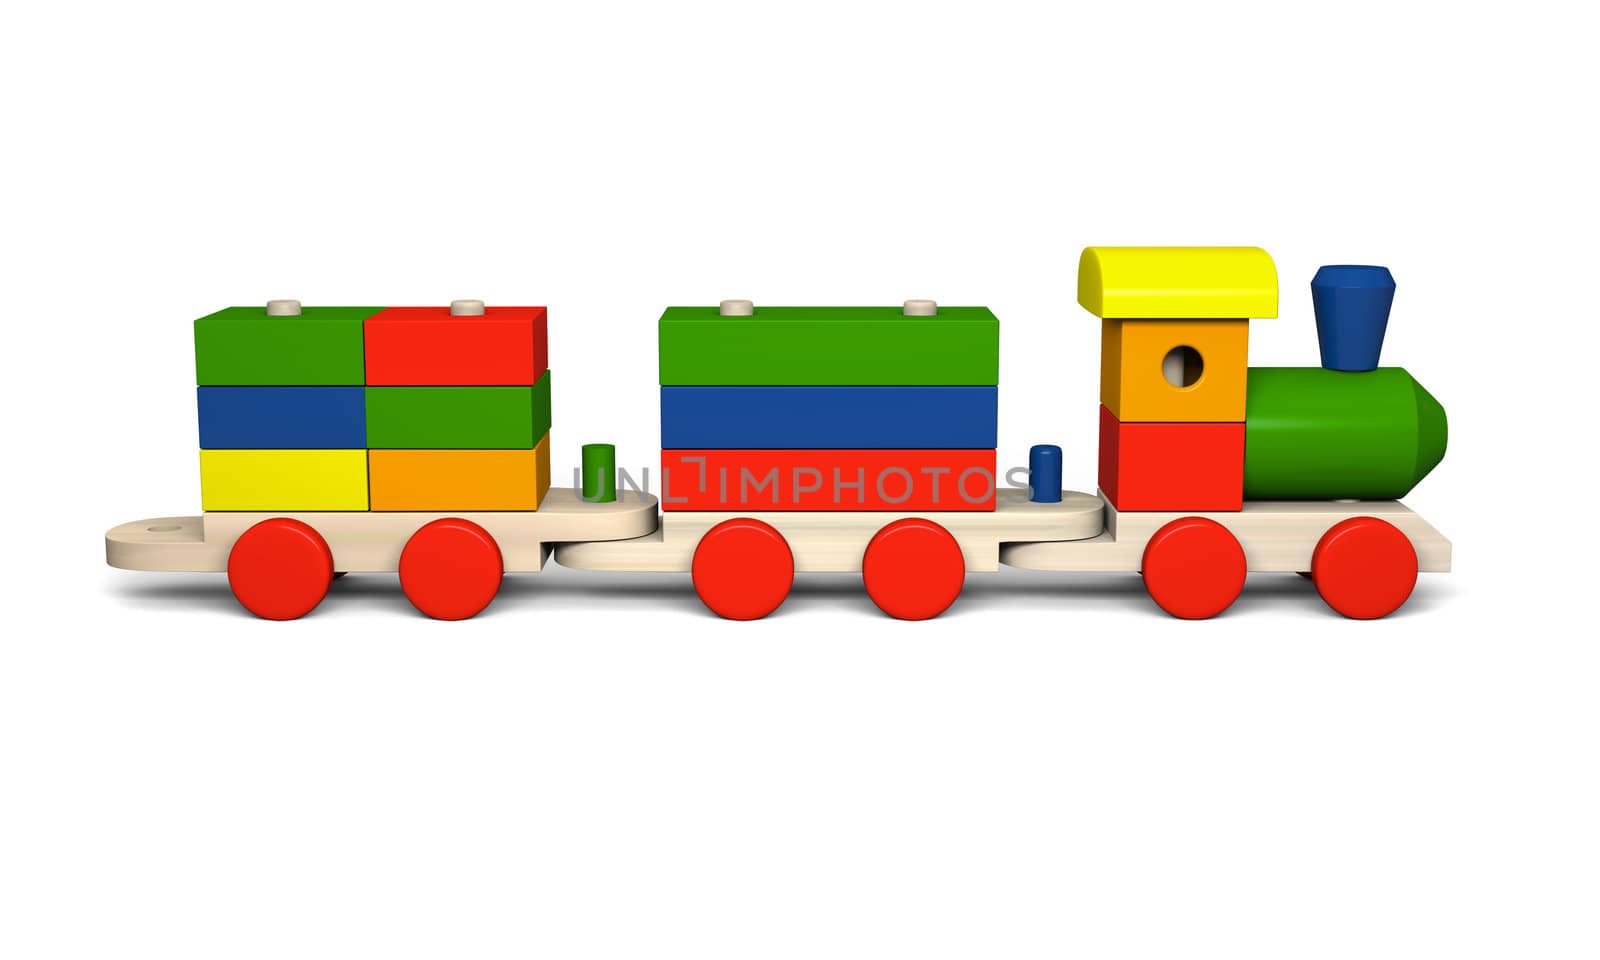 3D illustration of colorful wooden toy train